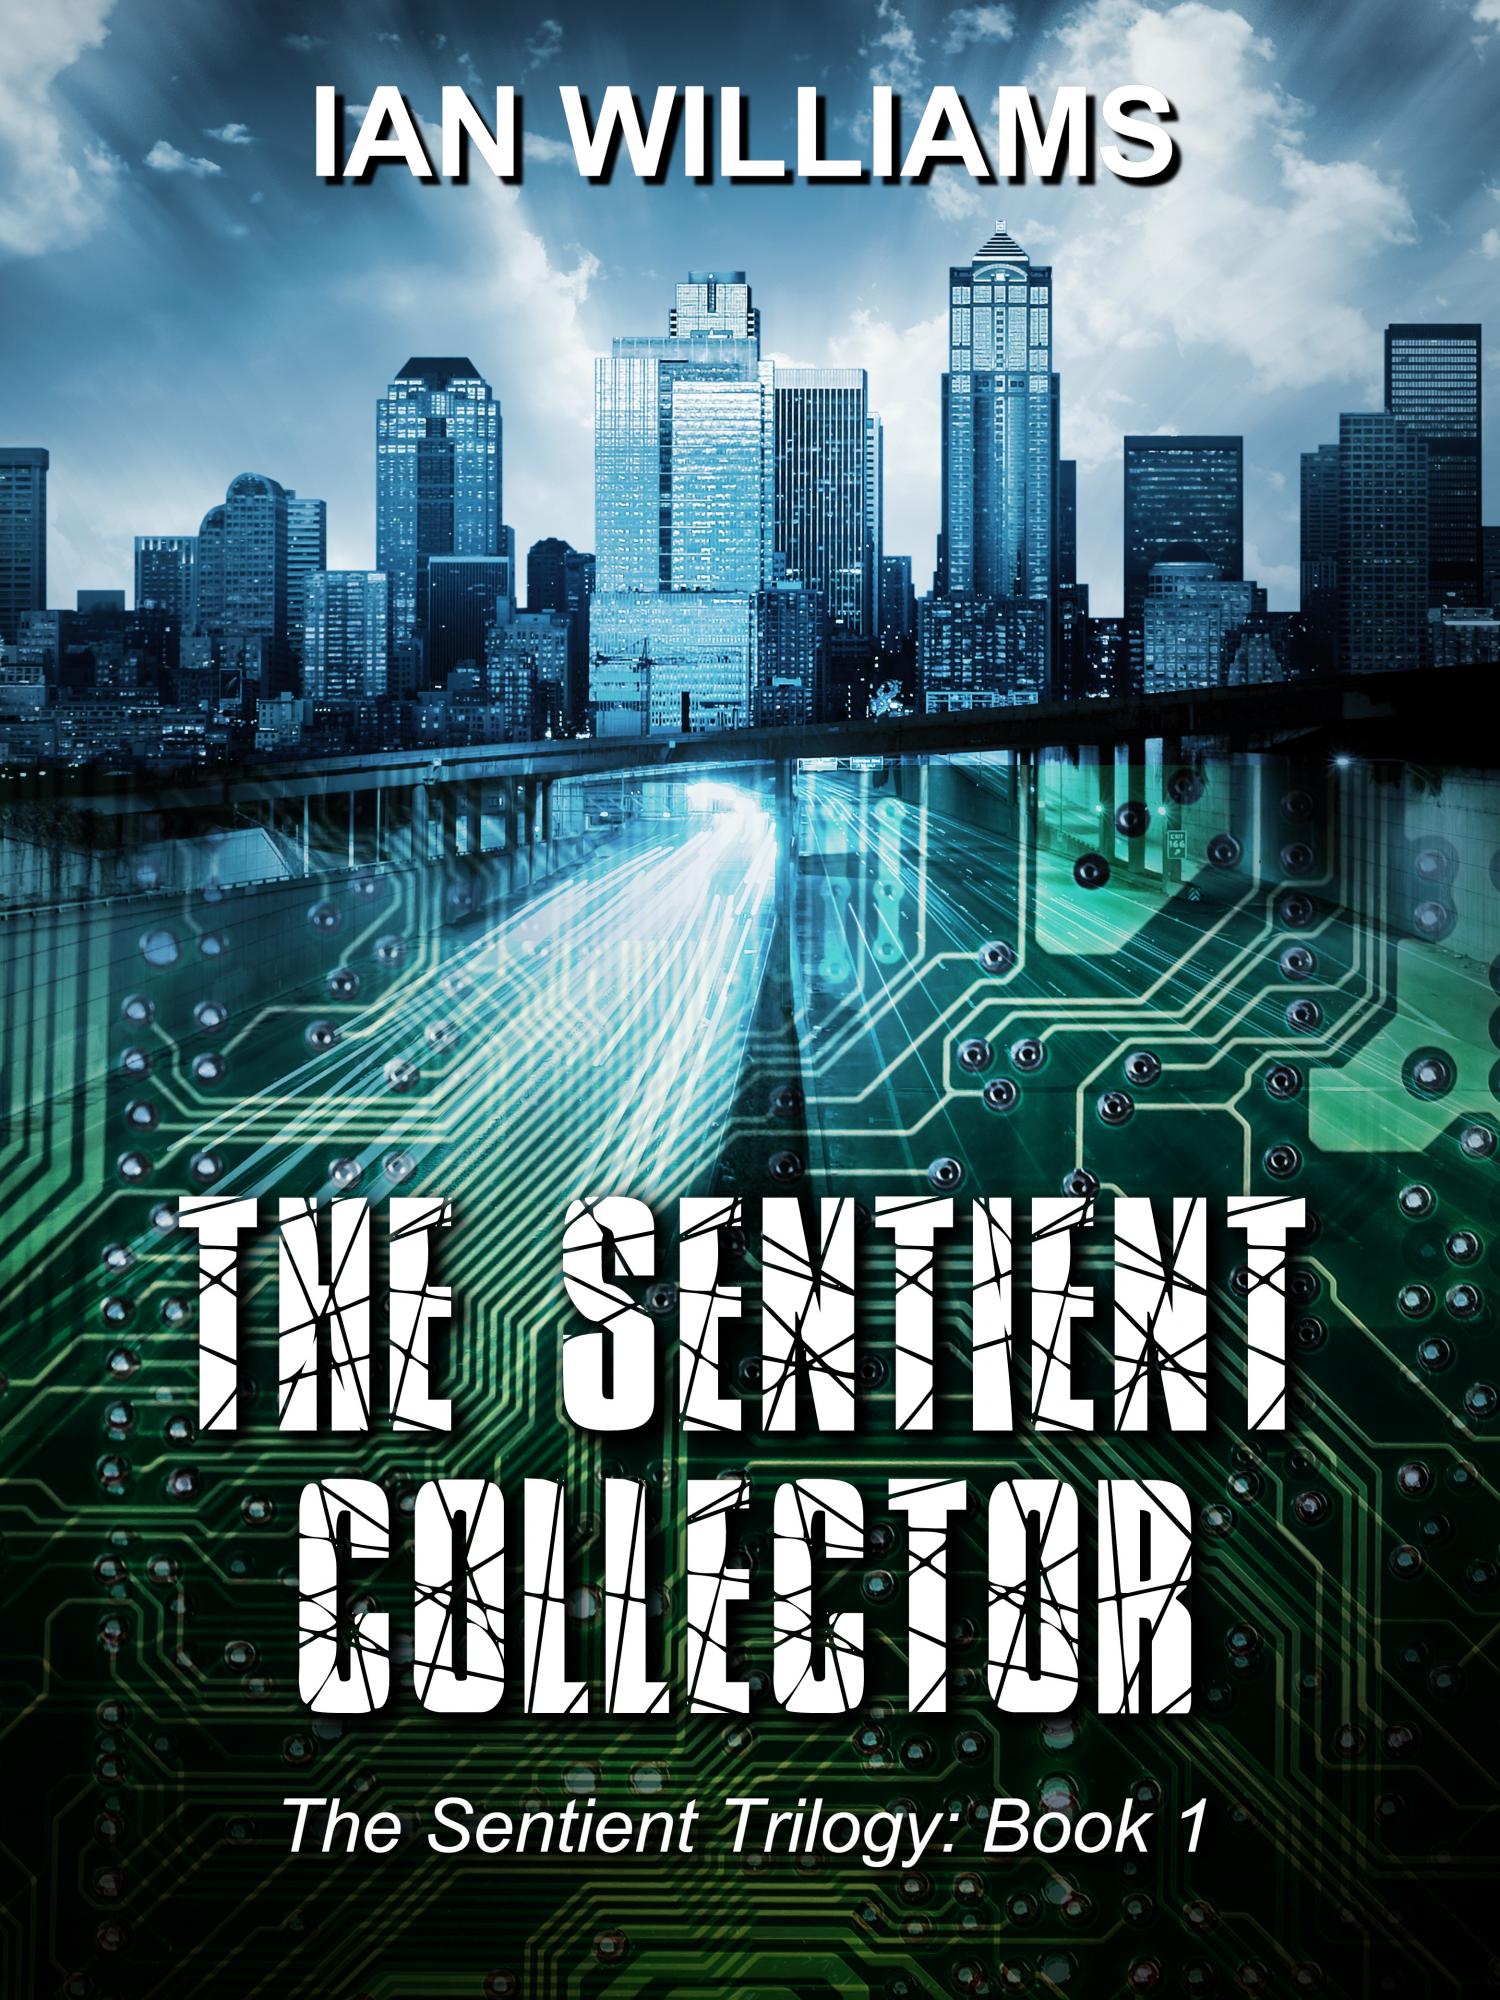 FREE: The Sentient Collector by Ian Williams